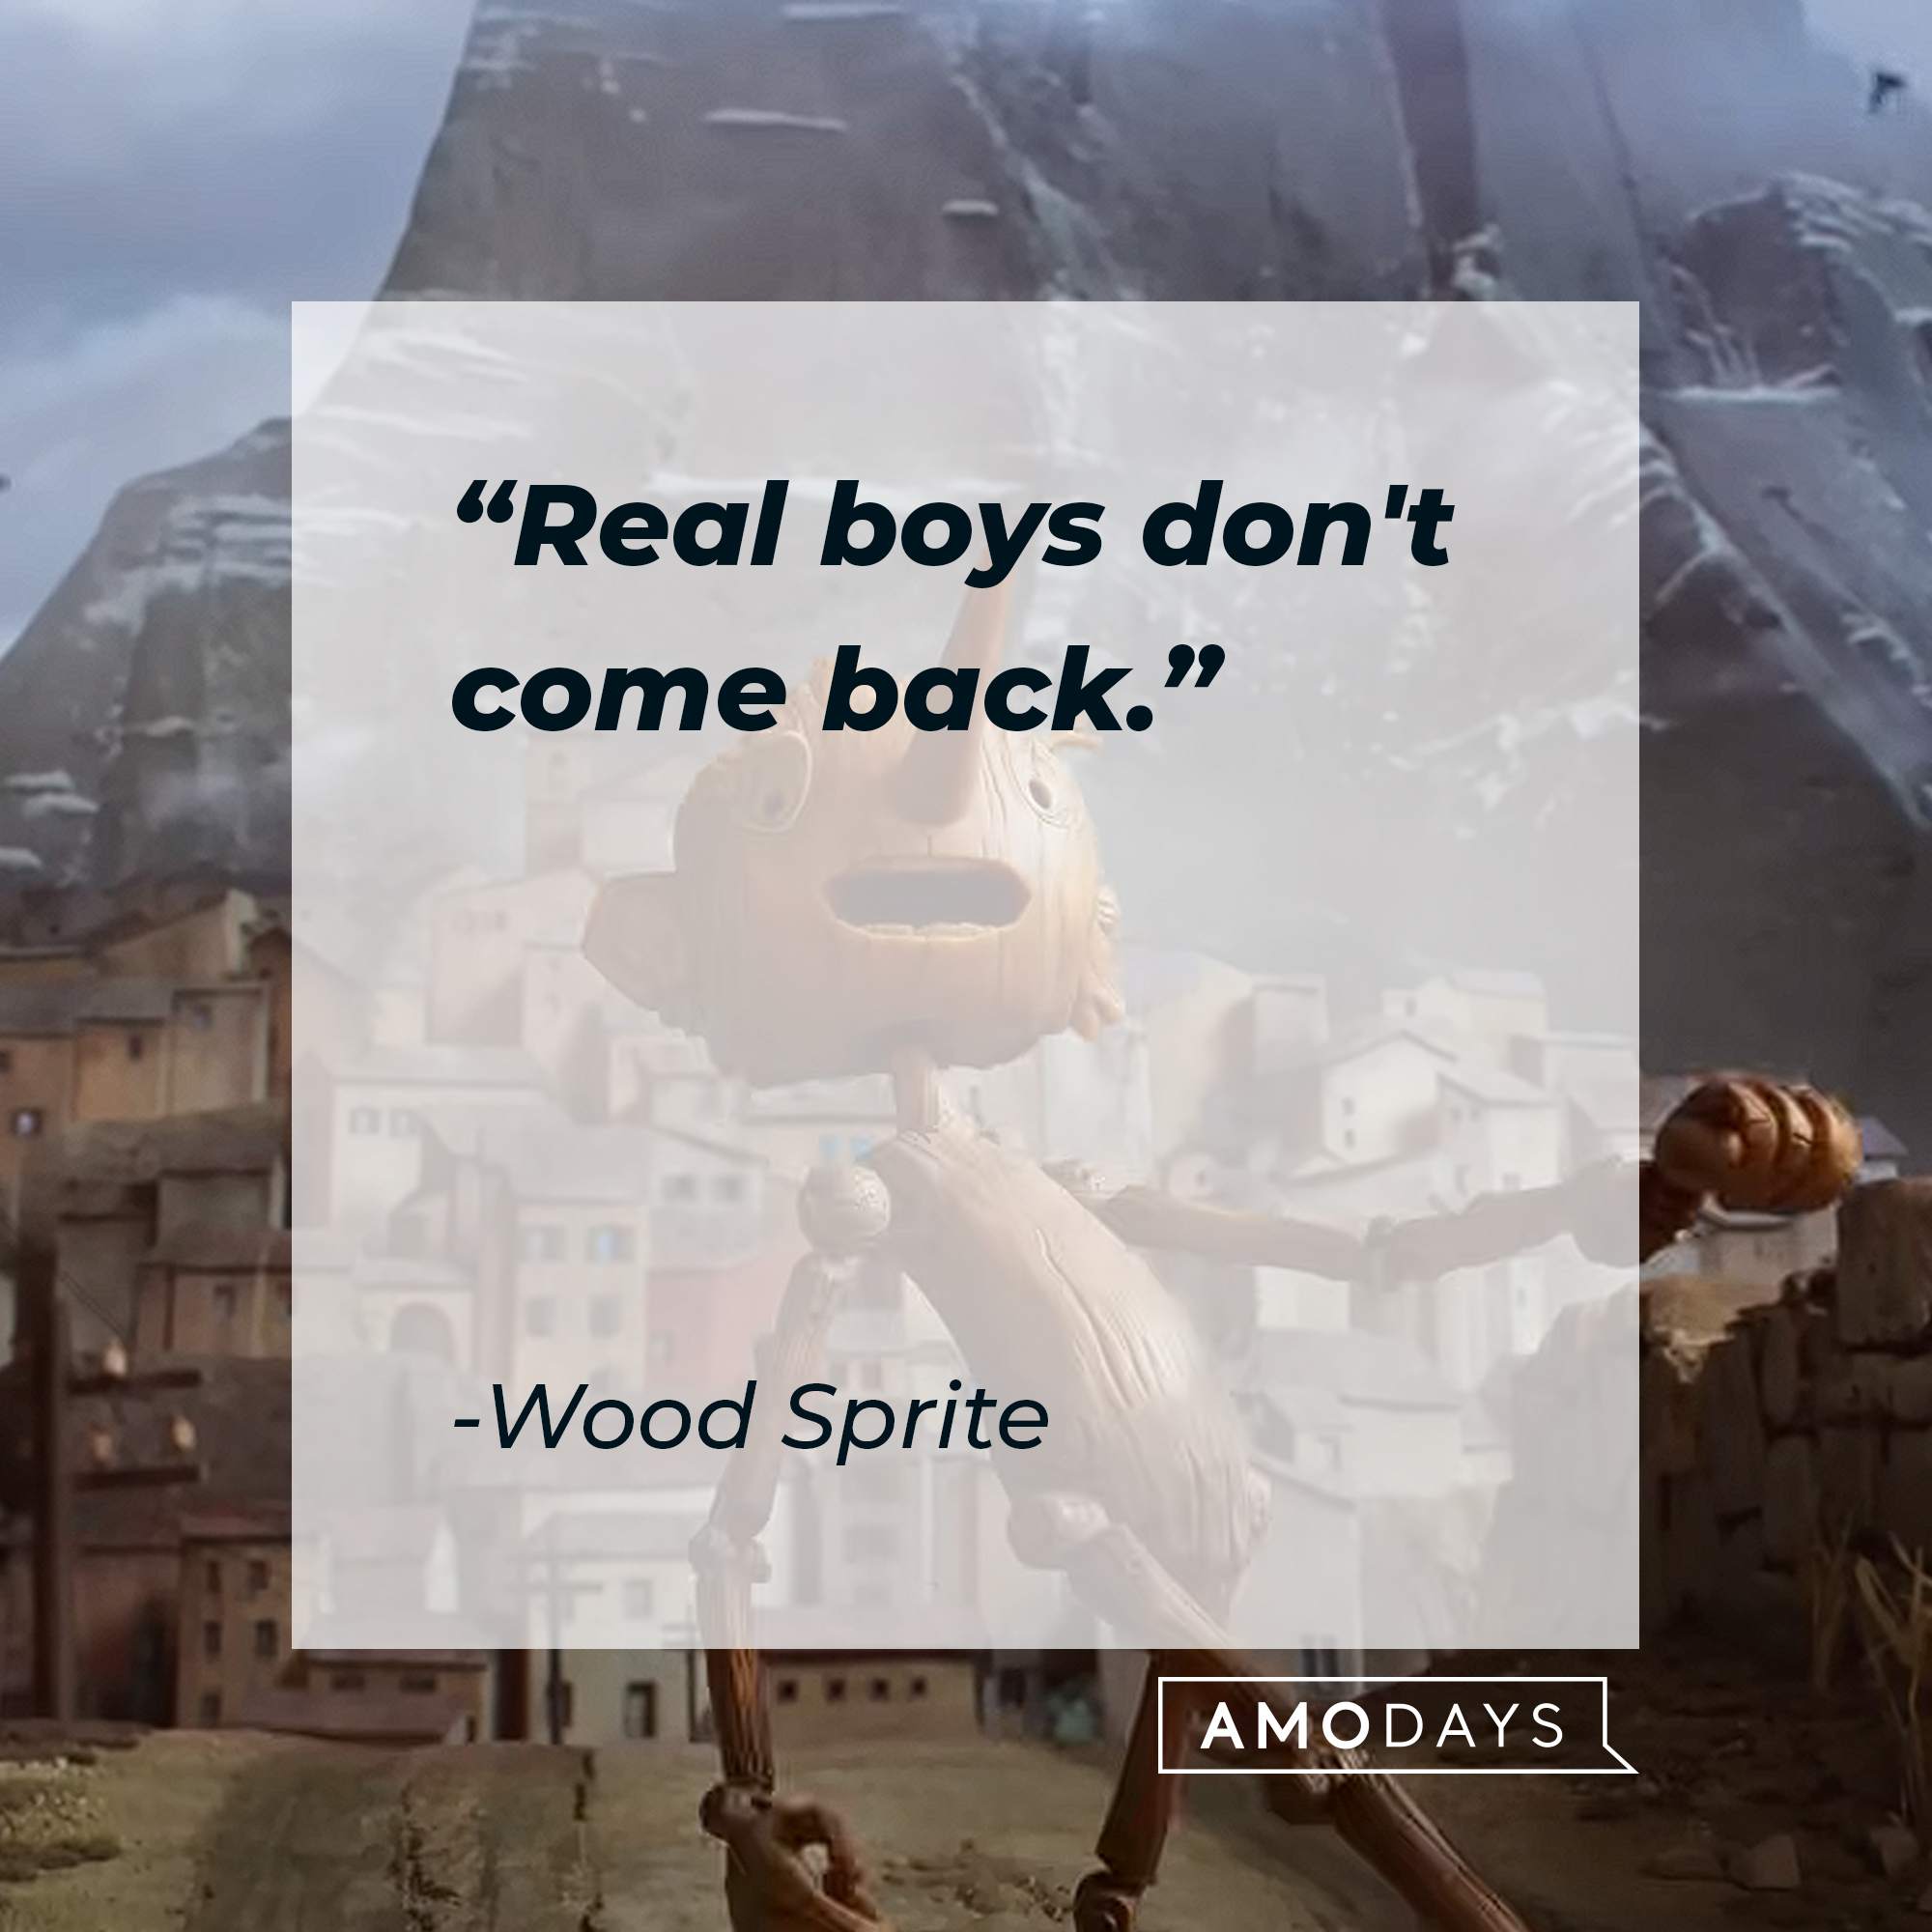 Wood Sprite's quote: "Real boys don't come back." | Image: AmoDays